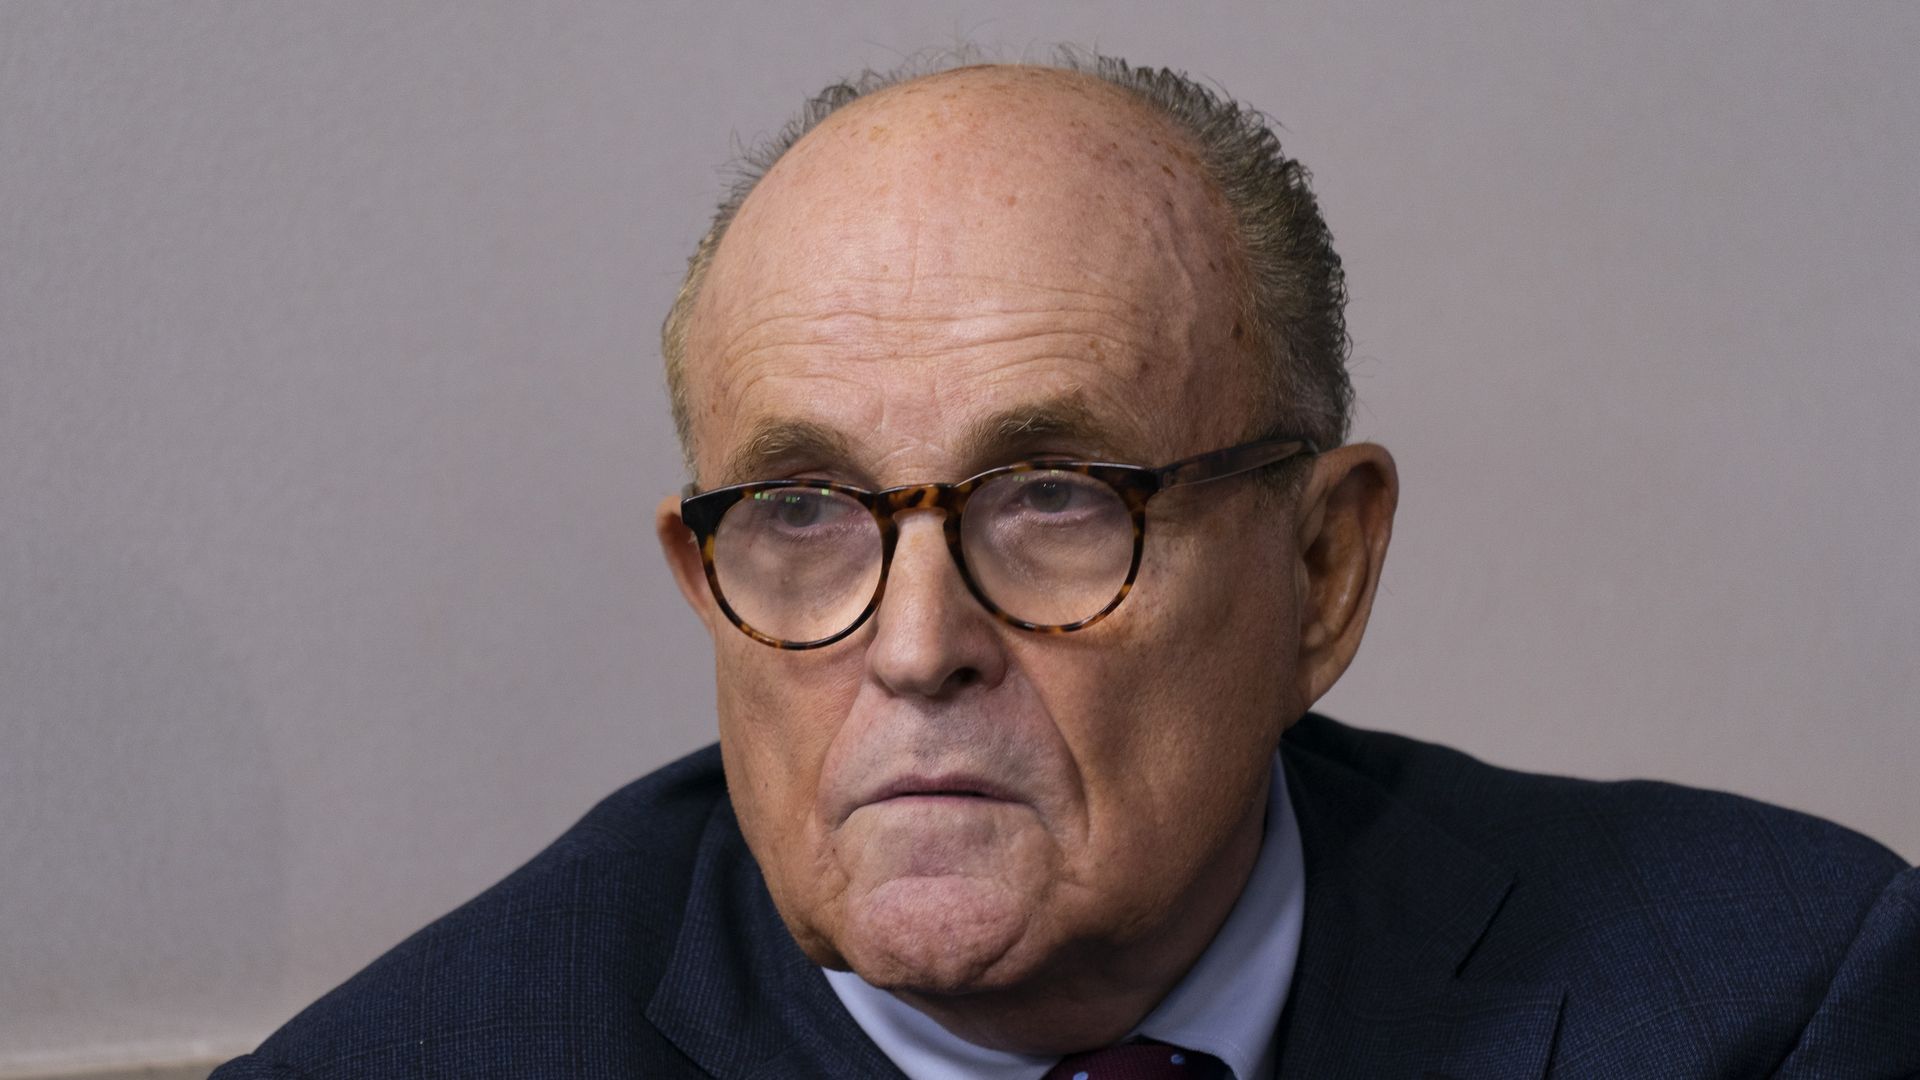 Rudy Giuliani in the James S. Brady Press Briefing Room at the White House in Washington, D.C., U.S., on Sunday, Sept. 27, 2020.